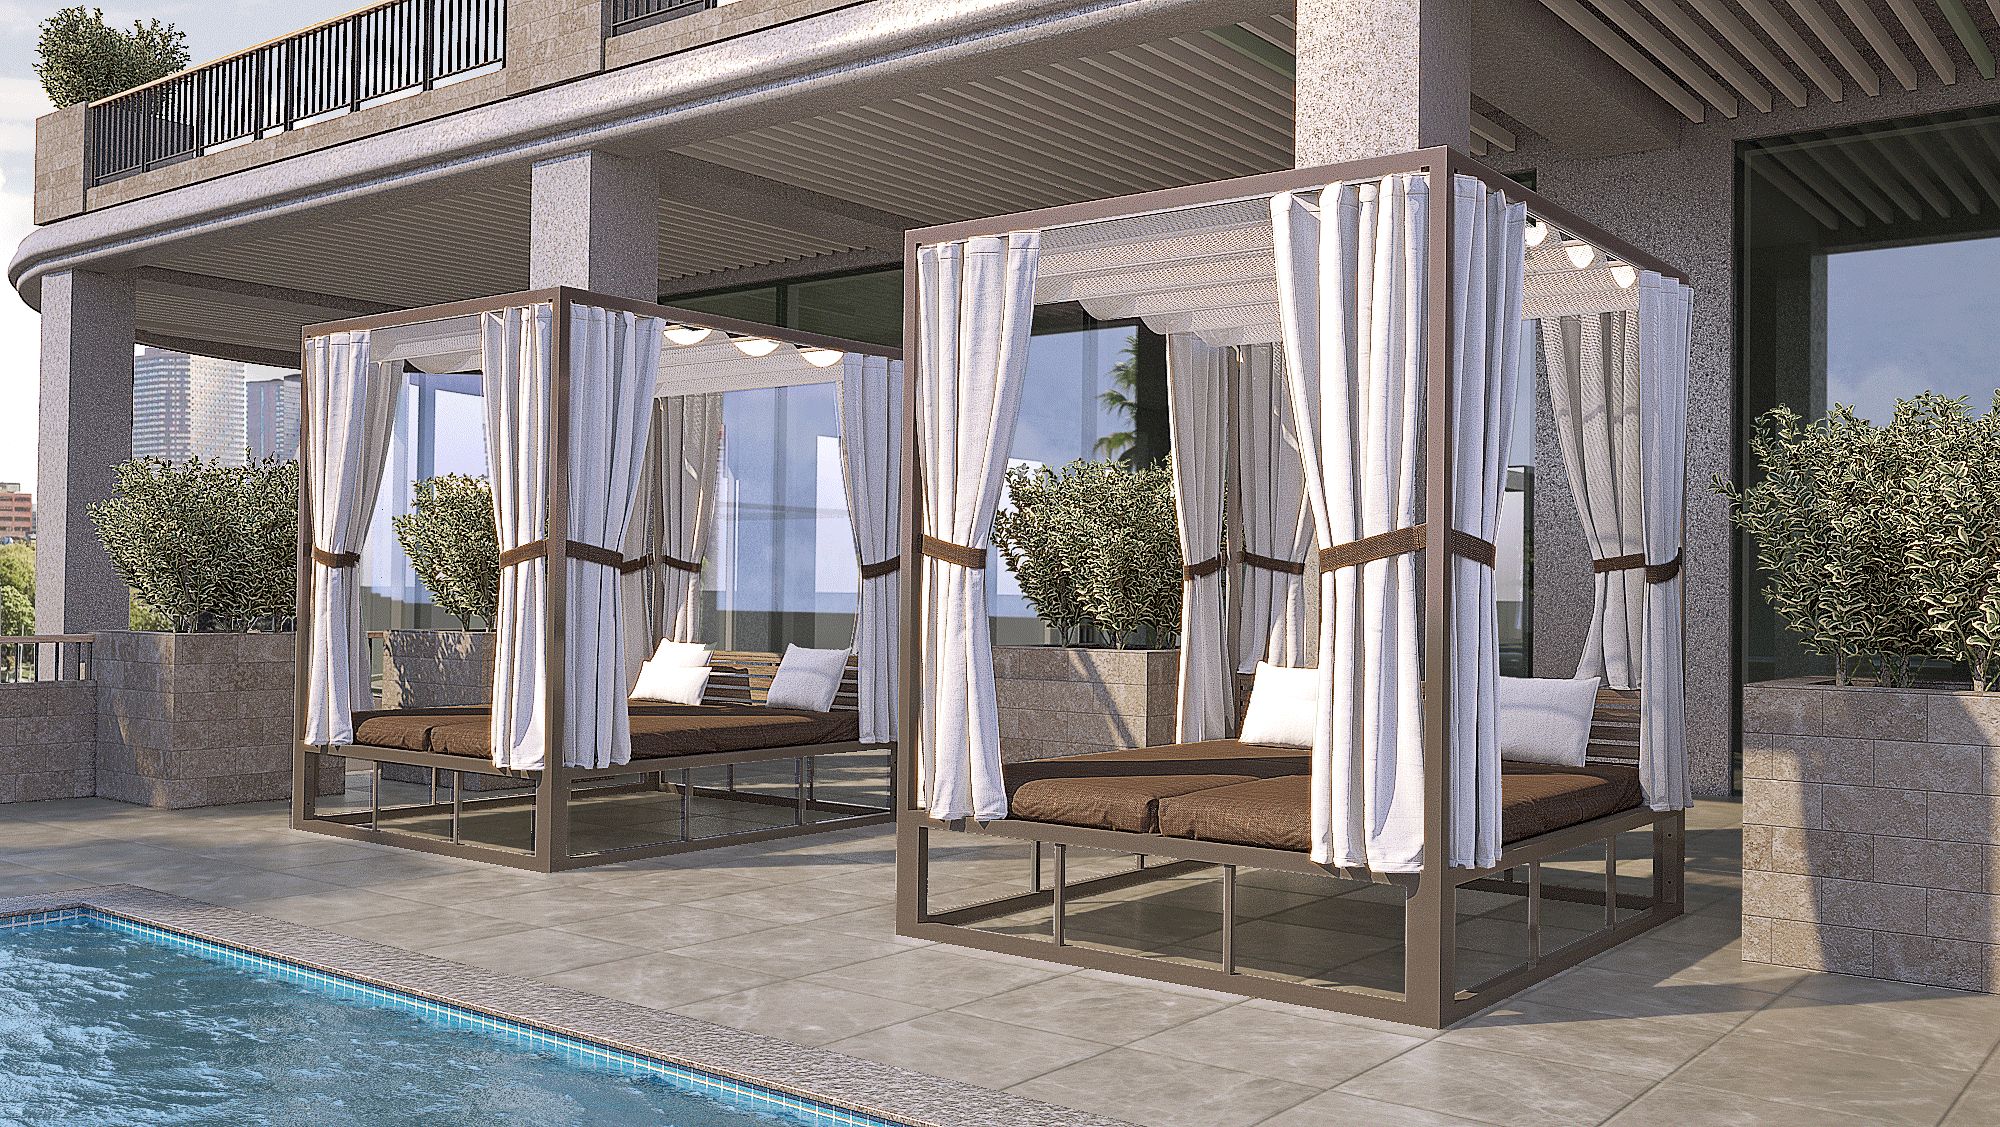 Academy Design's Chateau daybed, right perspective view, highlighting its durable 6061-T6 aluminum frame. The slide-on wire roof and full privacy curtains on all sides, crafted from marine-grade upholstery fabric, make it a top choice for those seeking a luxurious outdoor haven.